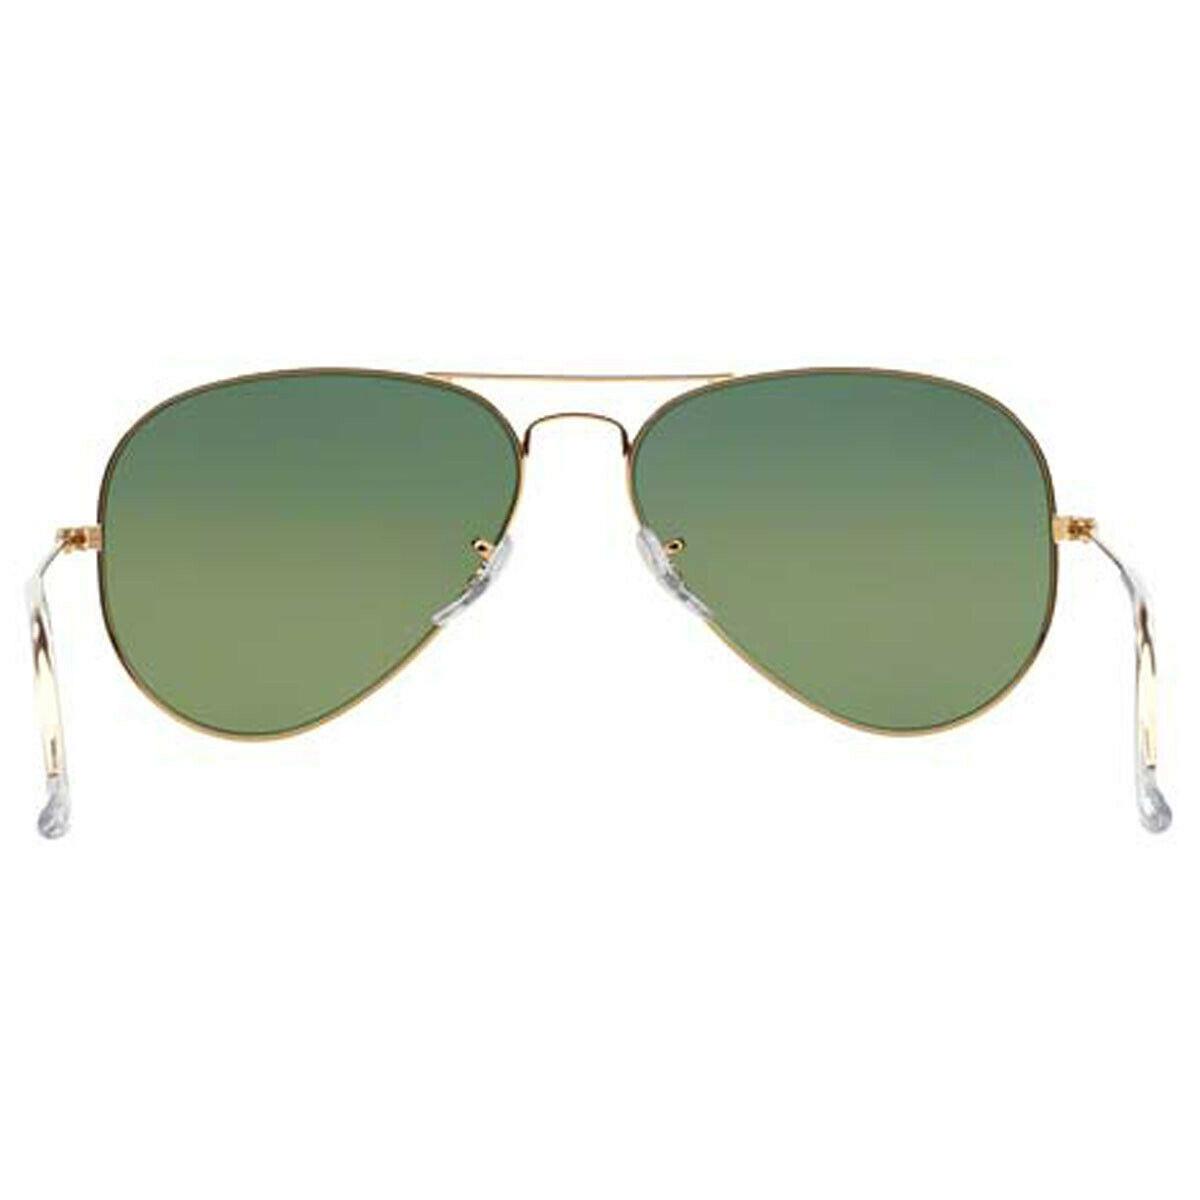 Ray-Ban sunglasses  - Gold Frame, Green Mirrored Lens 2